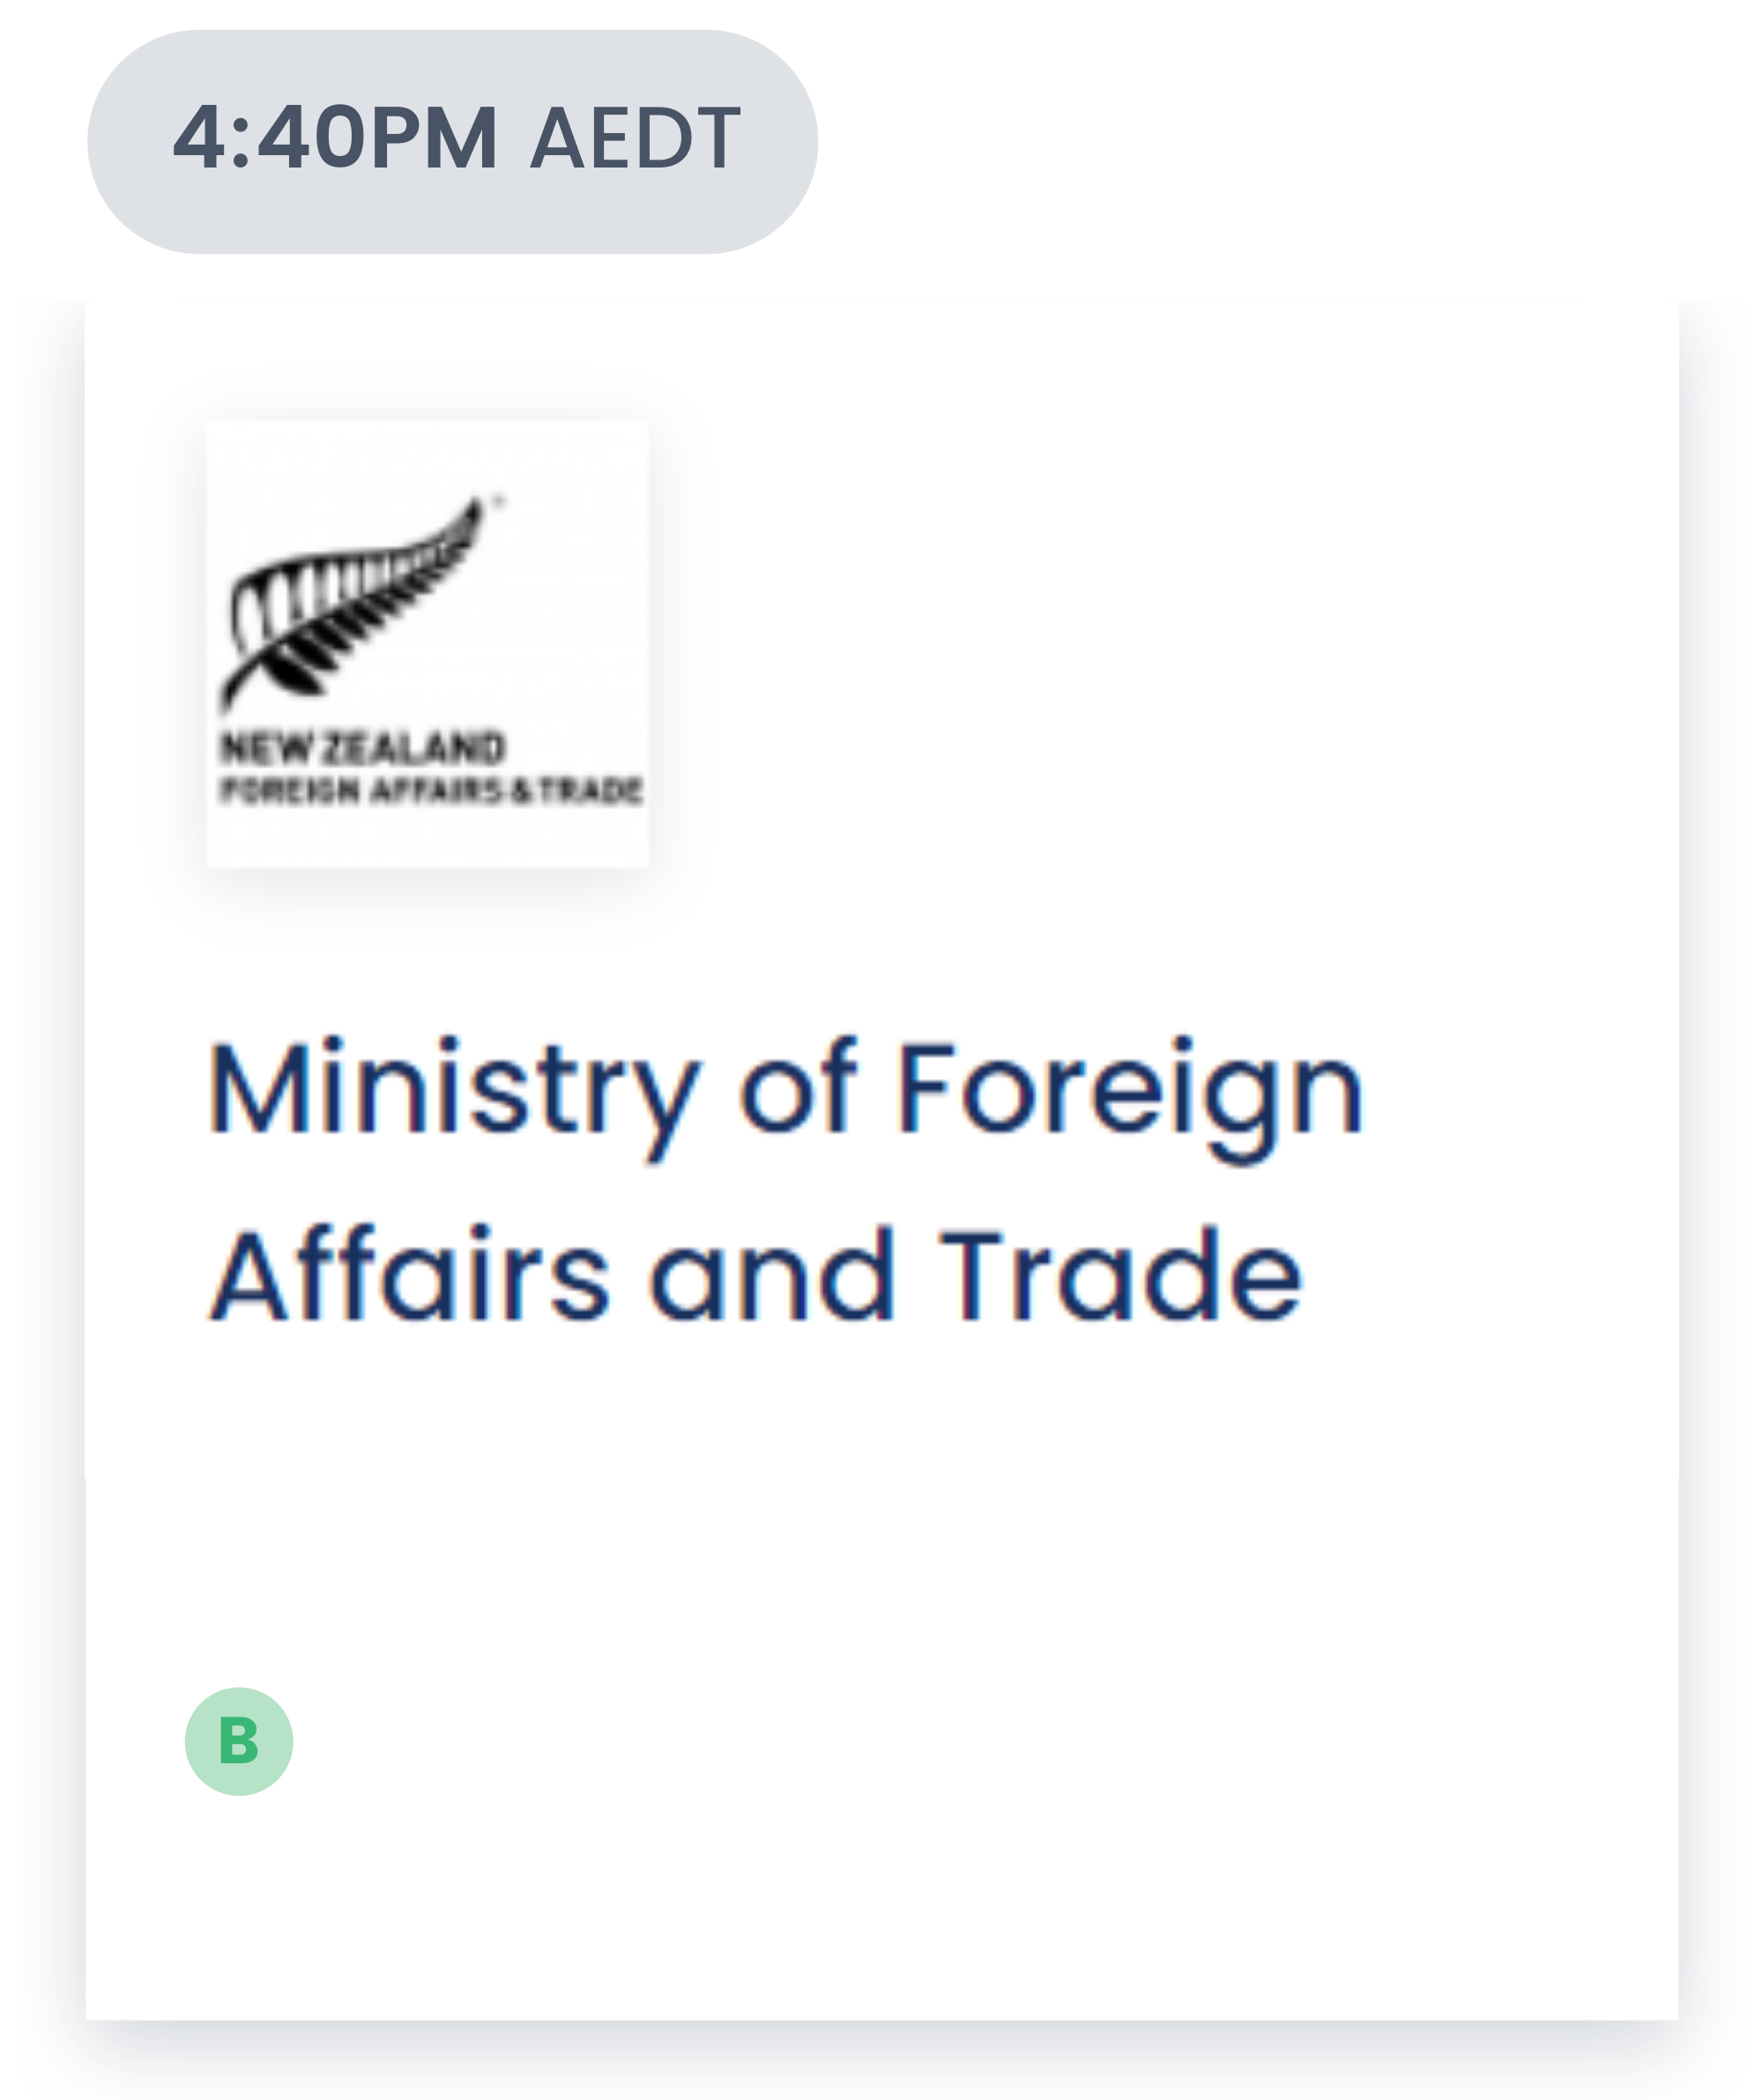 anz-super-fair-ministry-foreign-affairs-tile.png